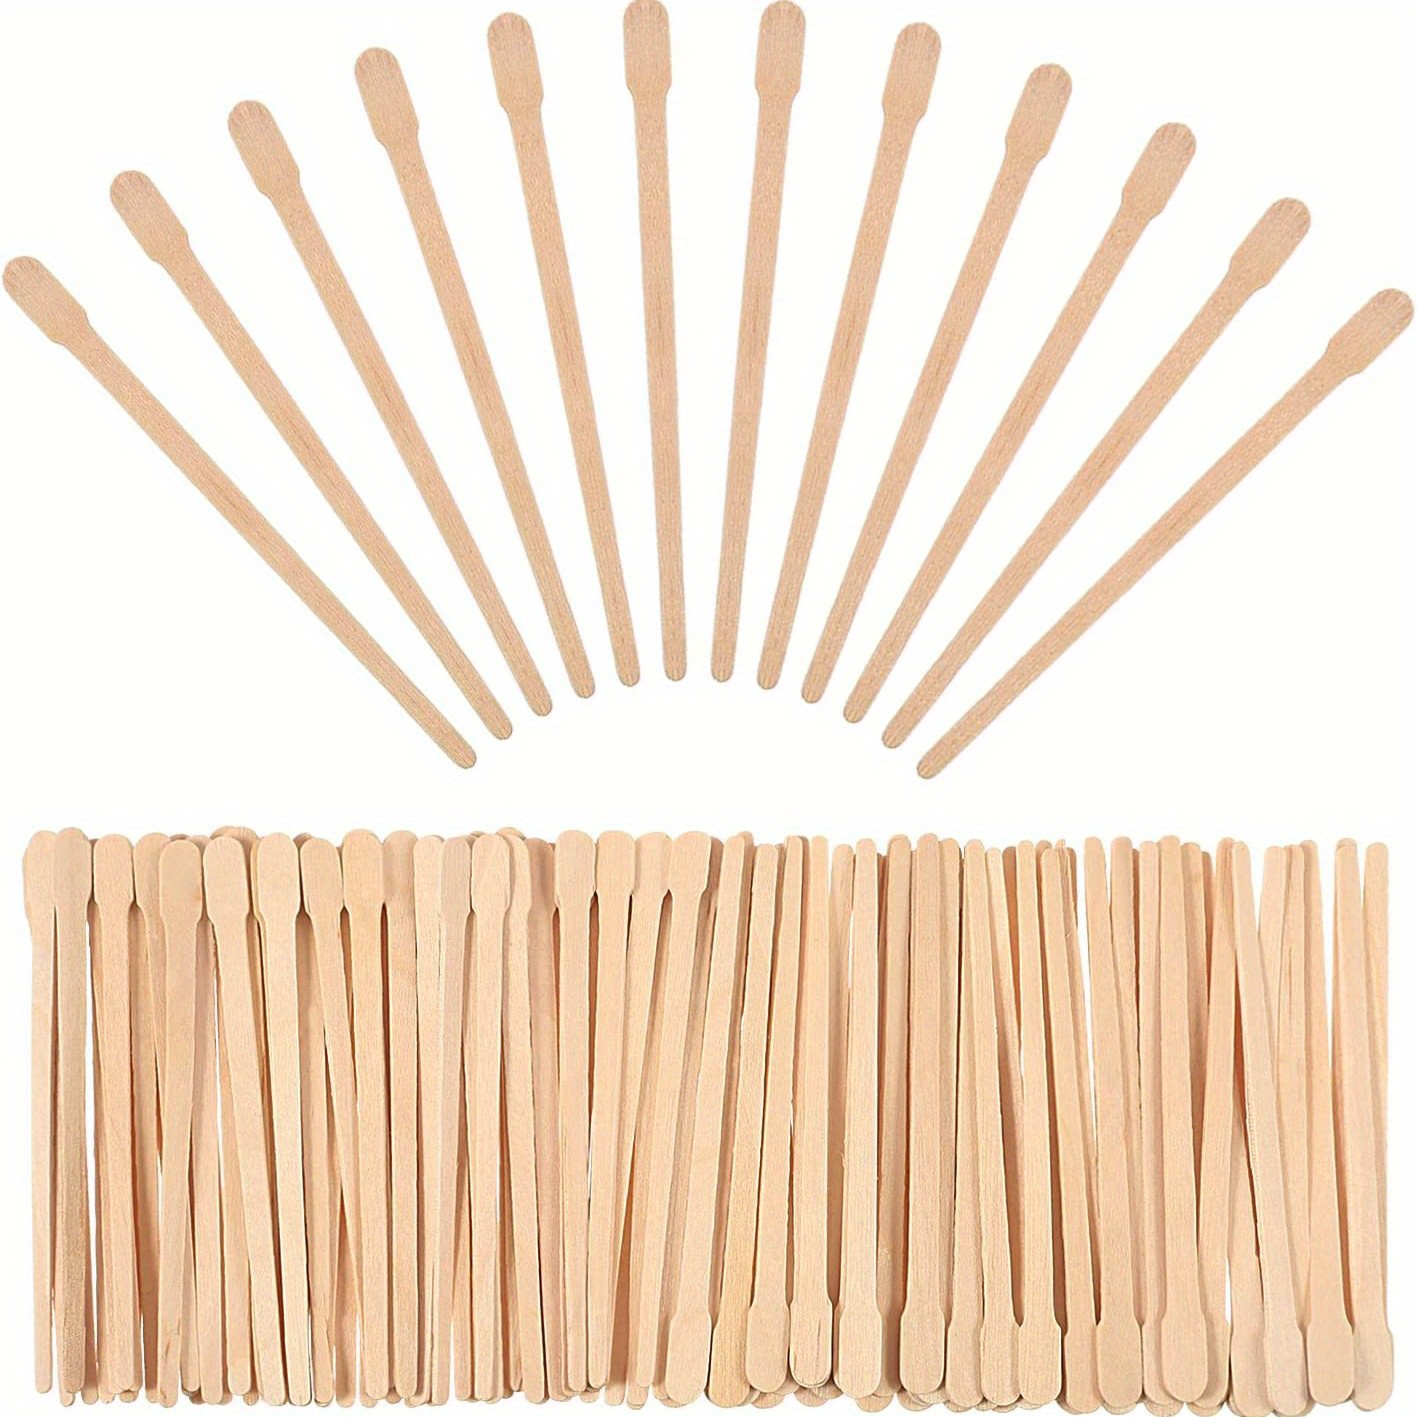 200 pcs Natural Wooden Wax Sticks for Precise Hair Removal and Smooth Skin  - Perfect for Spa and Home Use